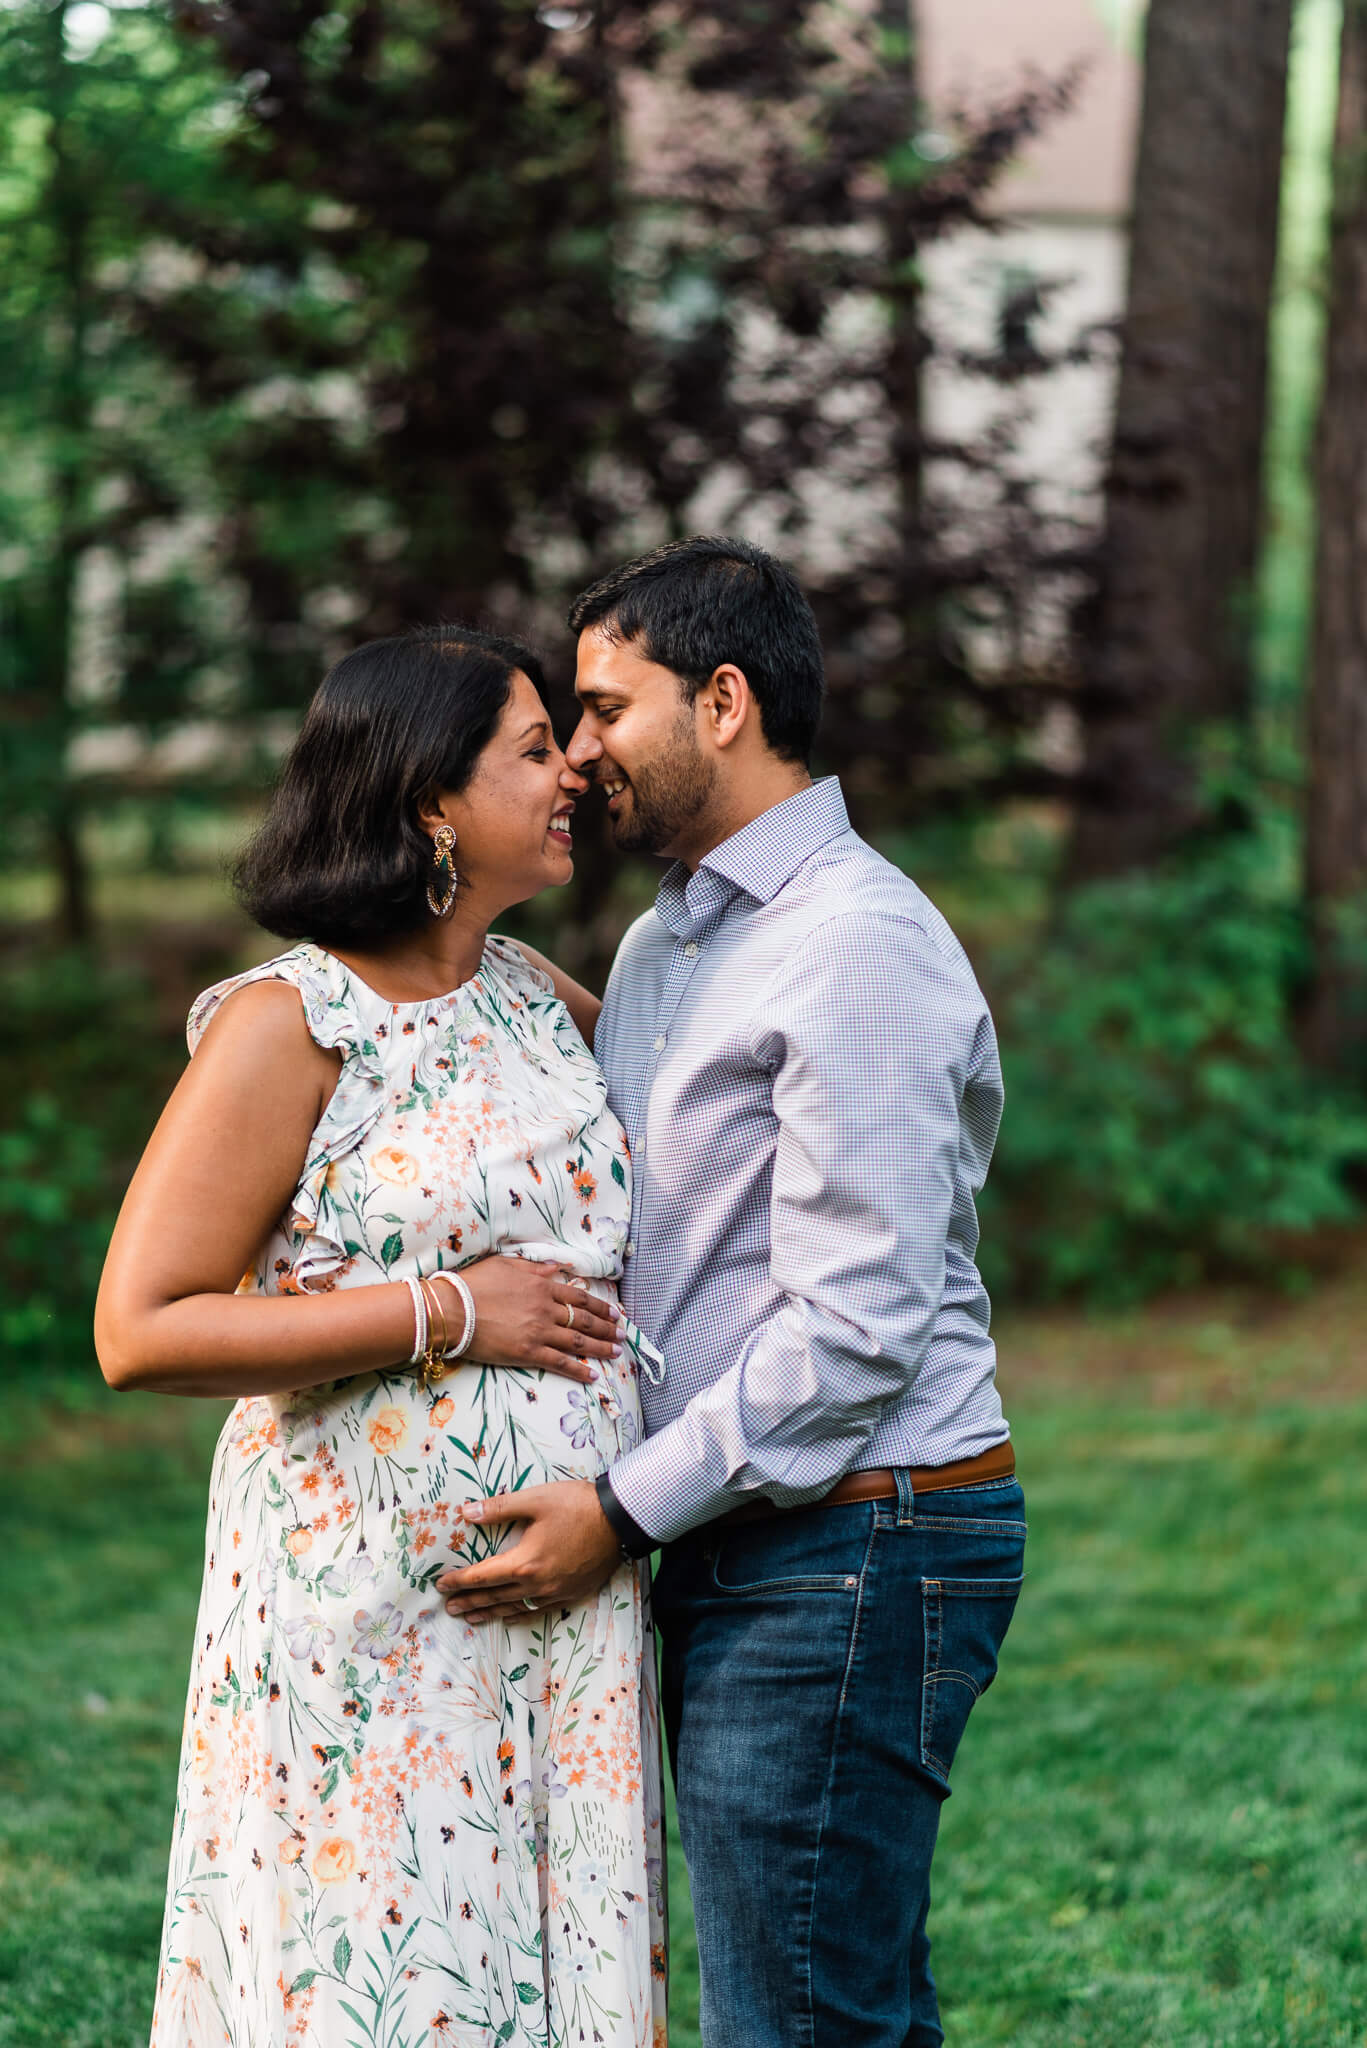 A mom to be leans in for a kiss from her husband in a floral dress while standing in a park holding the bump